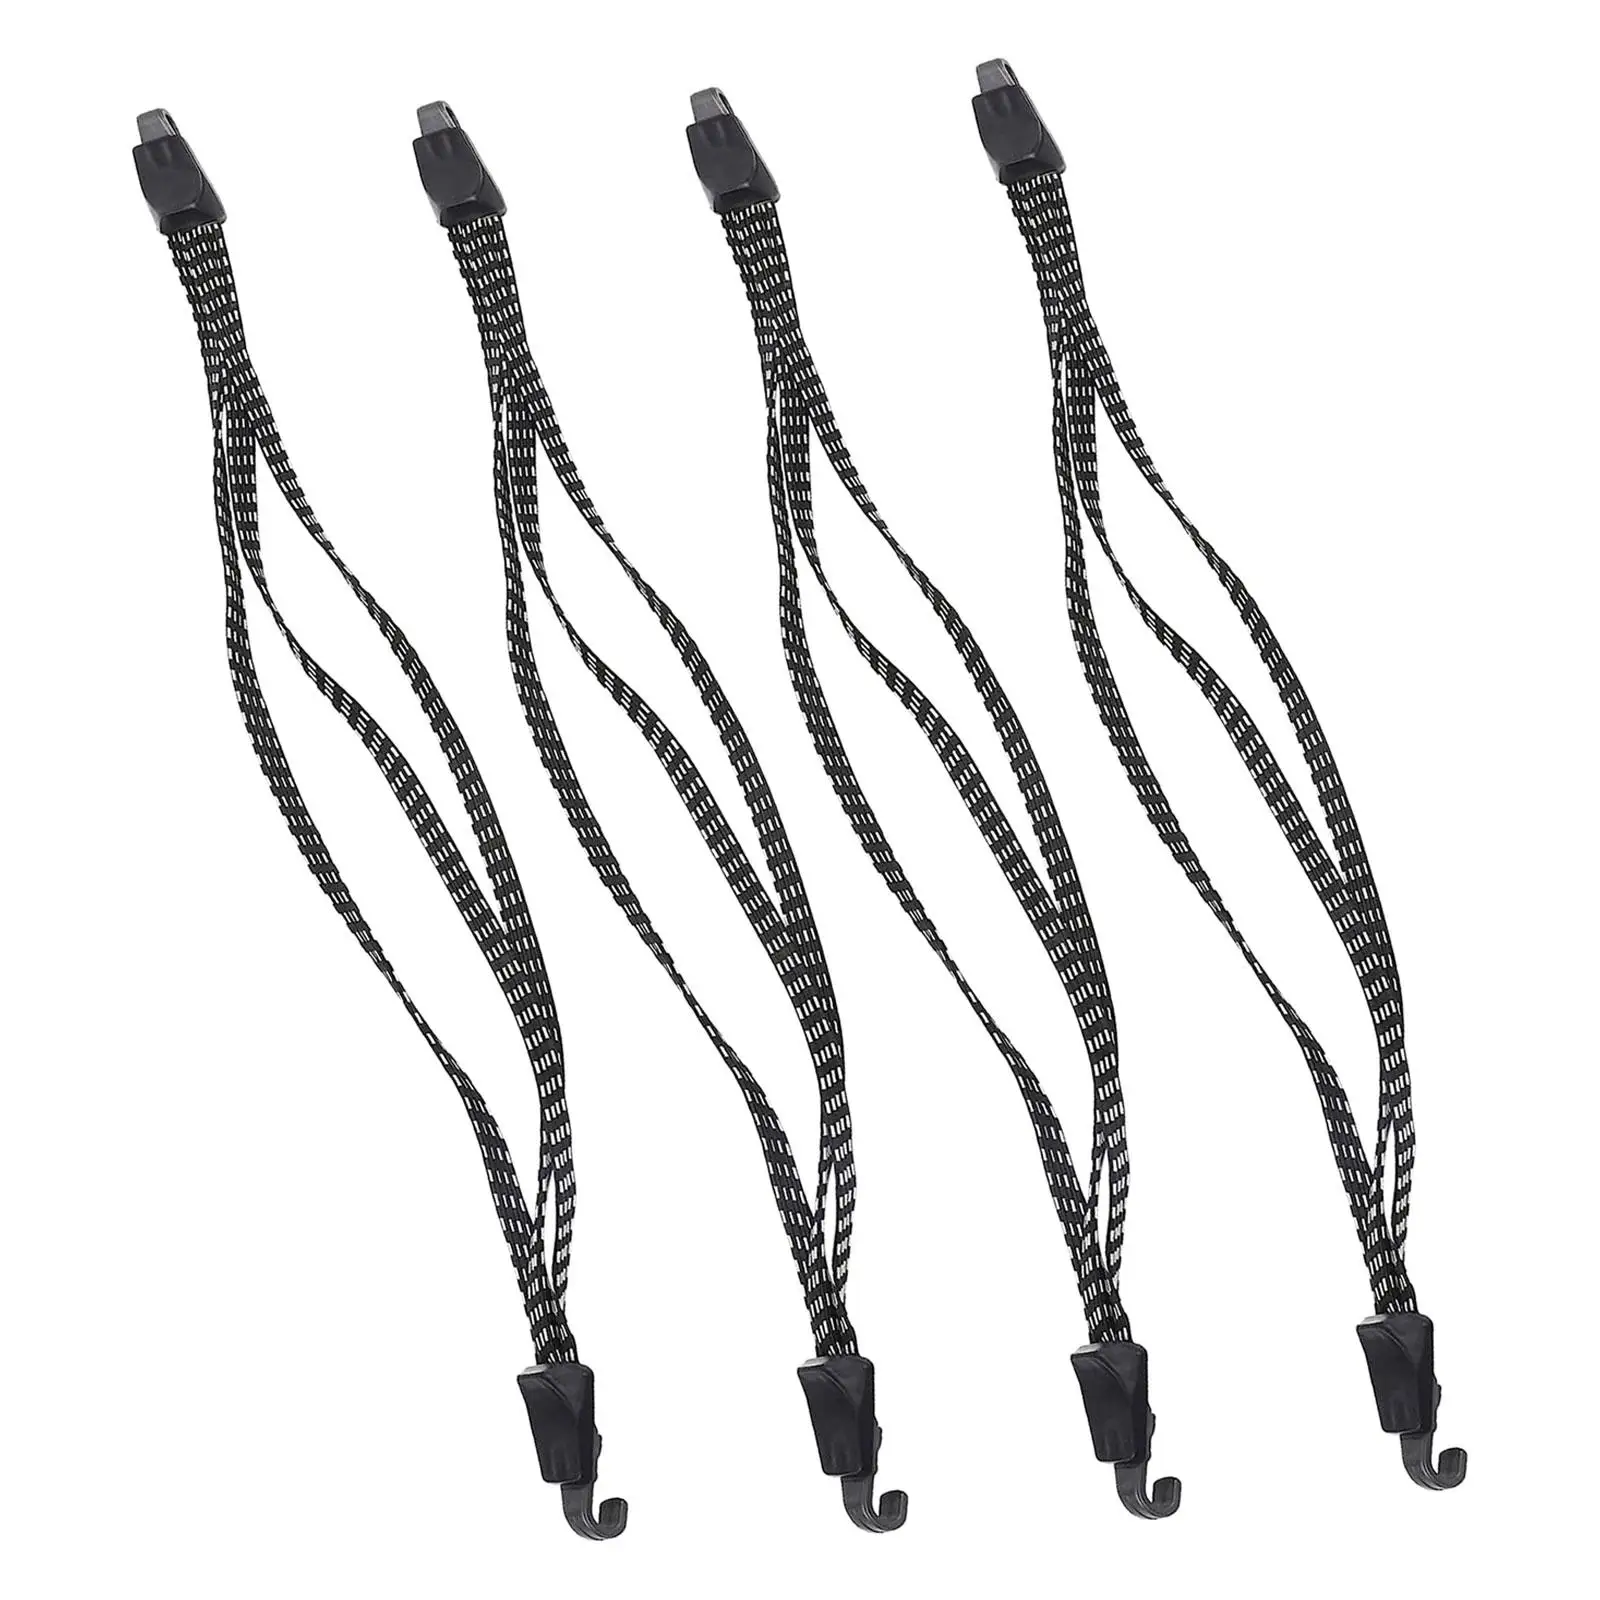 4 Pieces Motorcycle Luggage Rack Tie Down Straps Bungee Cords with Hooks Strong